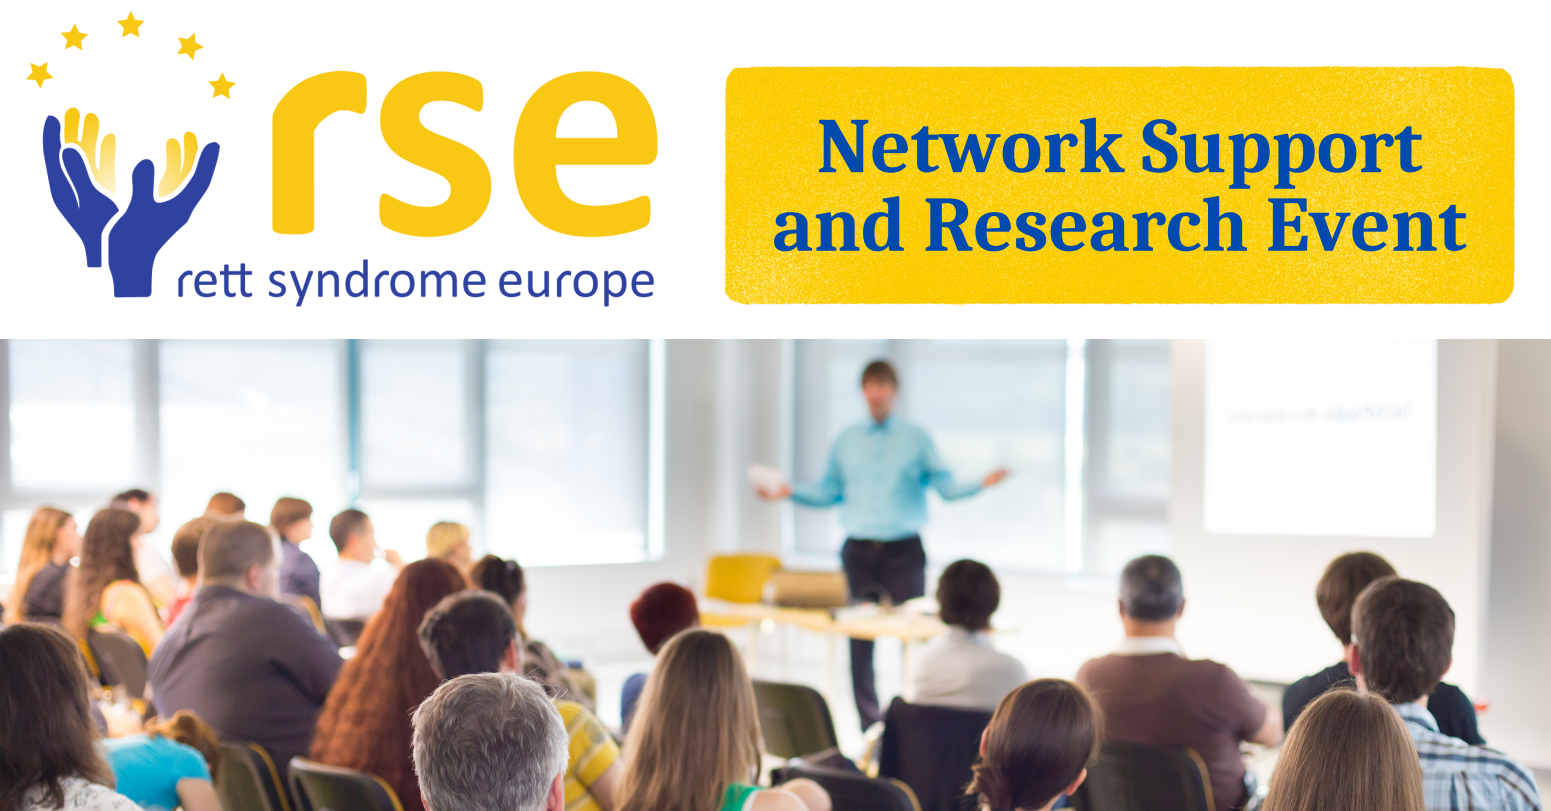 Network Support and Research Event coming soon!